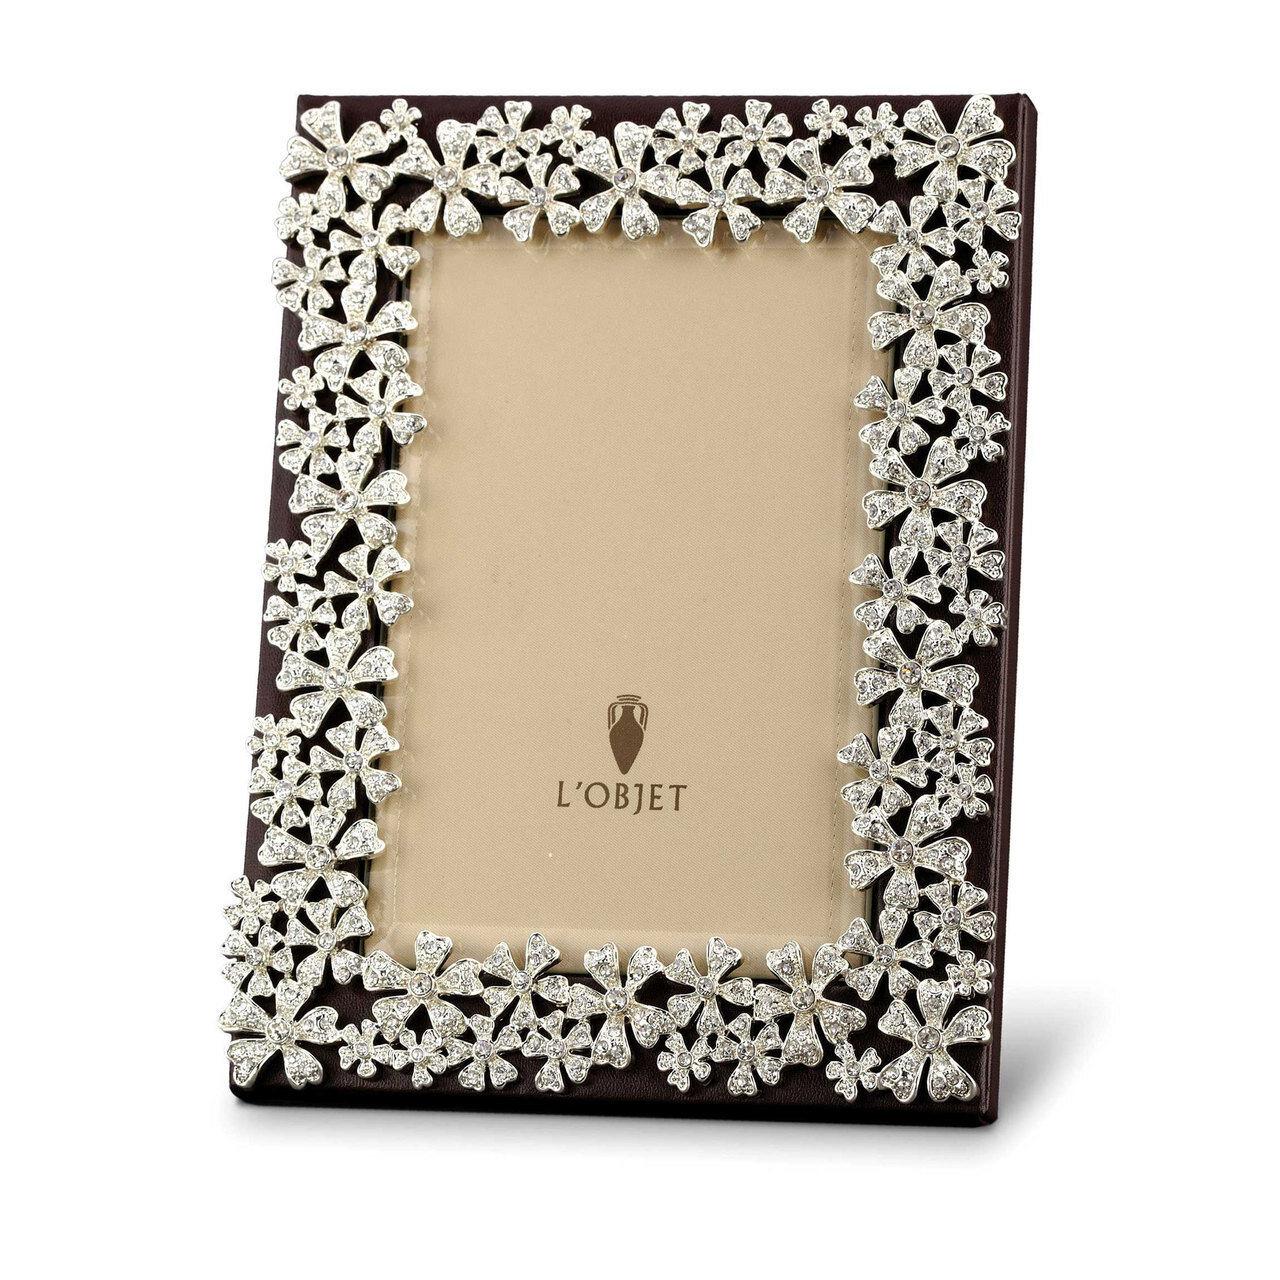 L'Objet Garland 8 x 10 Inch Platinum with White Crystals Picture Frame